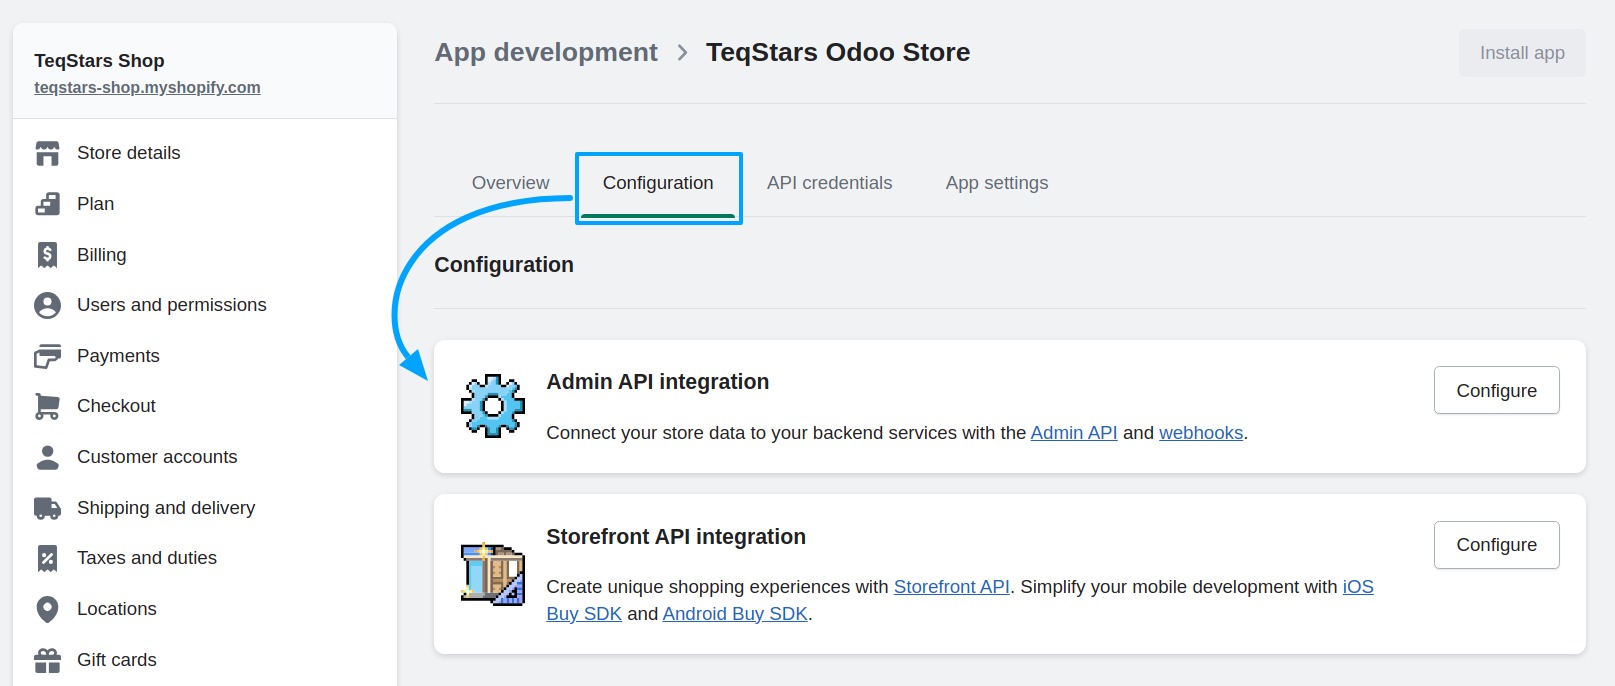 Configuration tab and select Configure in the Admin API Integration section